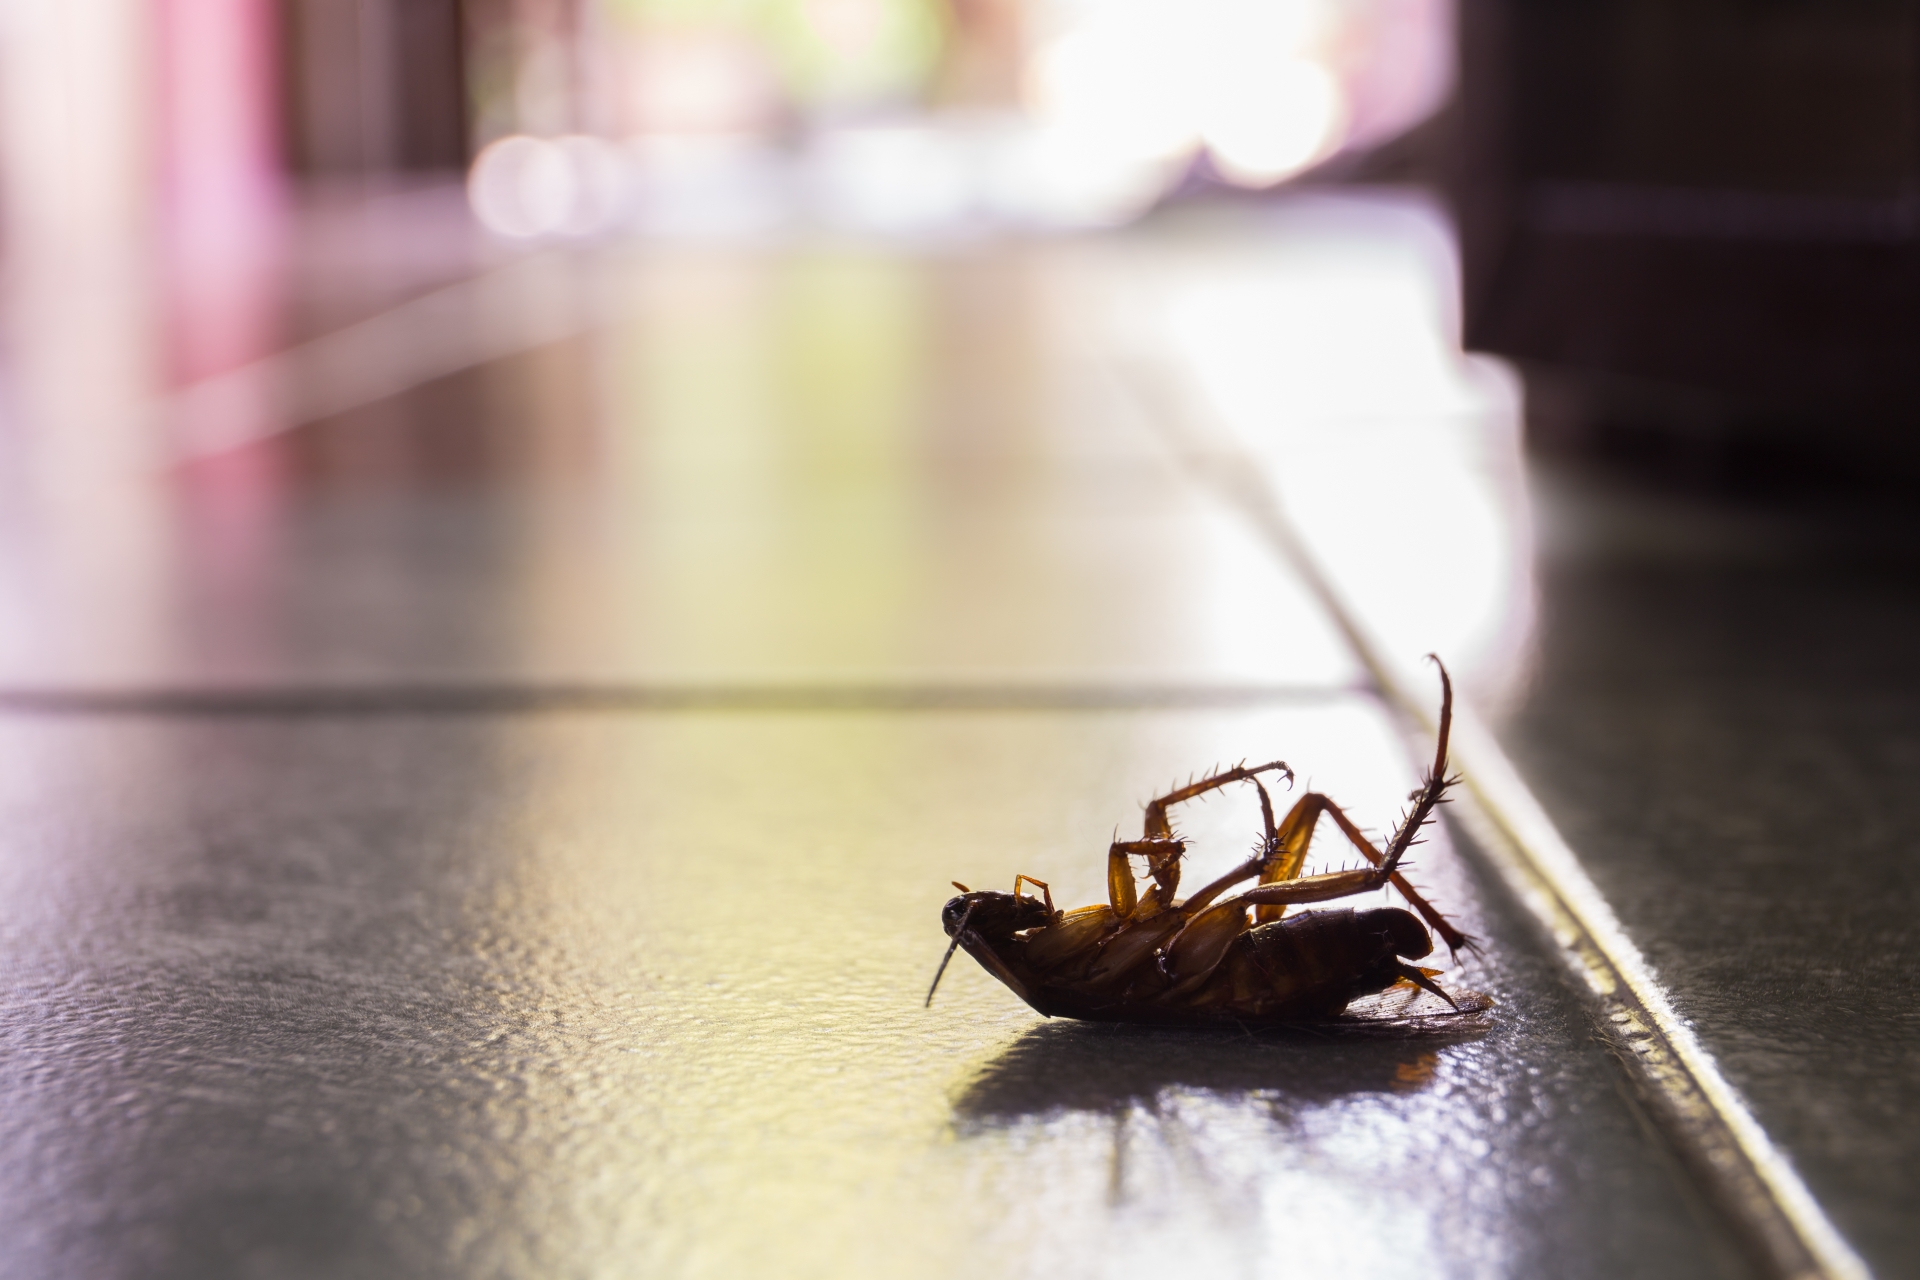 Cockroach Control, Pest Control in Bethnal Green, E2. Call Now 020 8166 9746